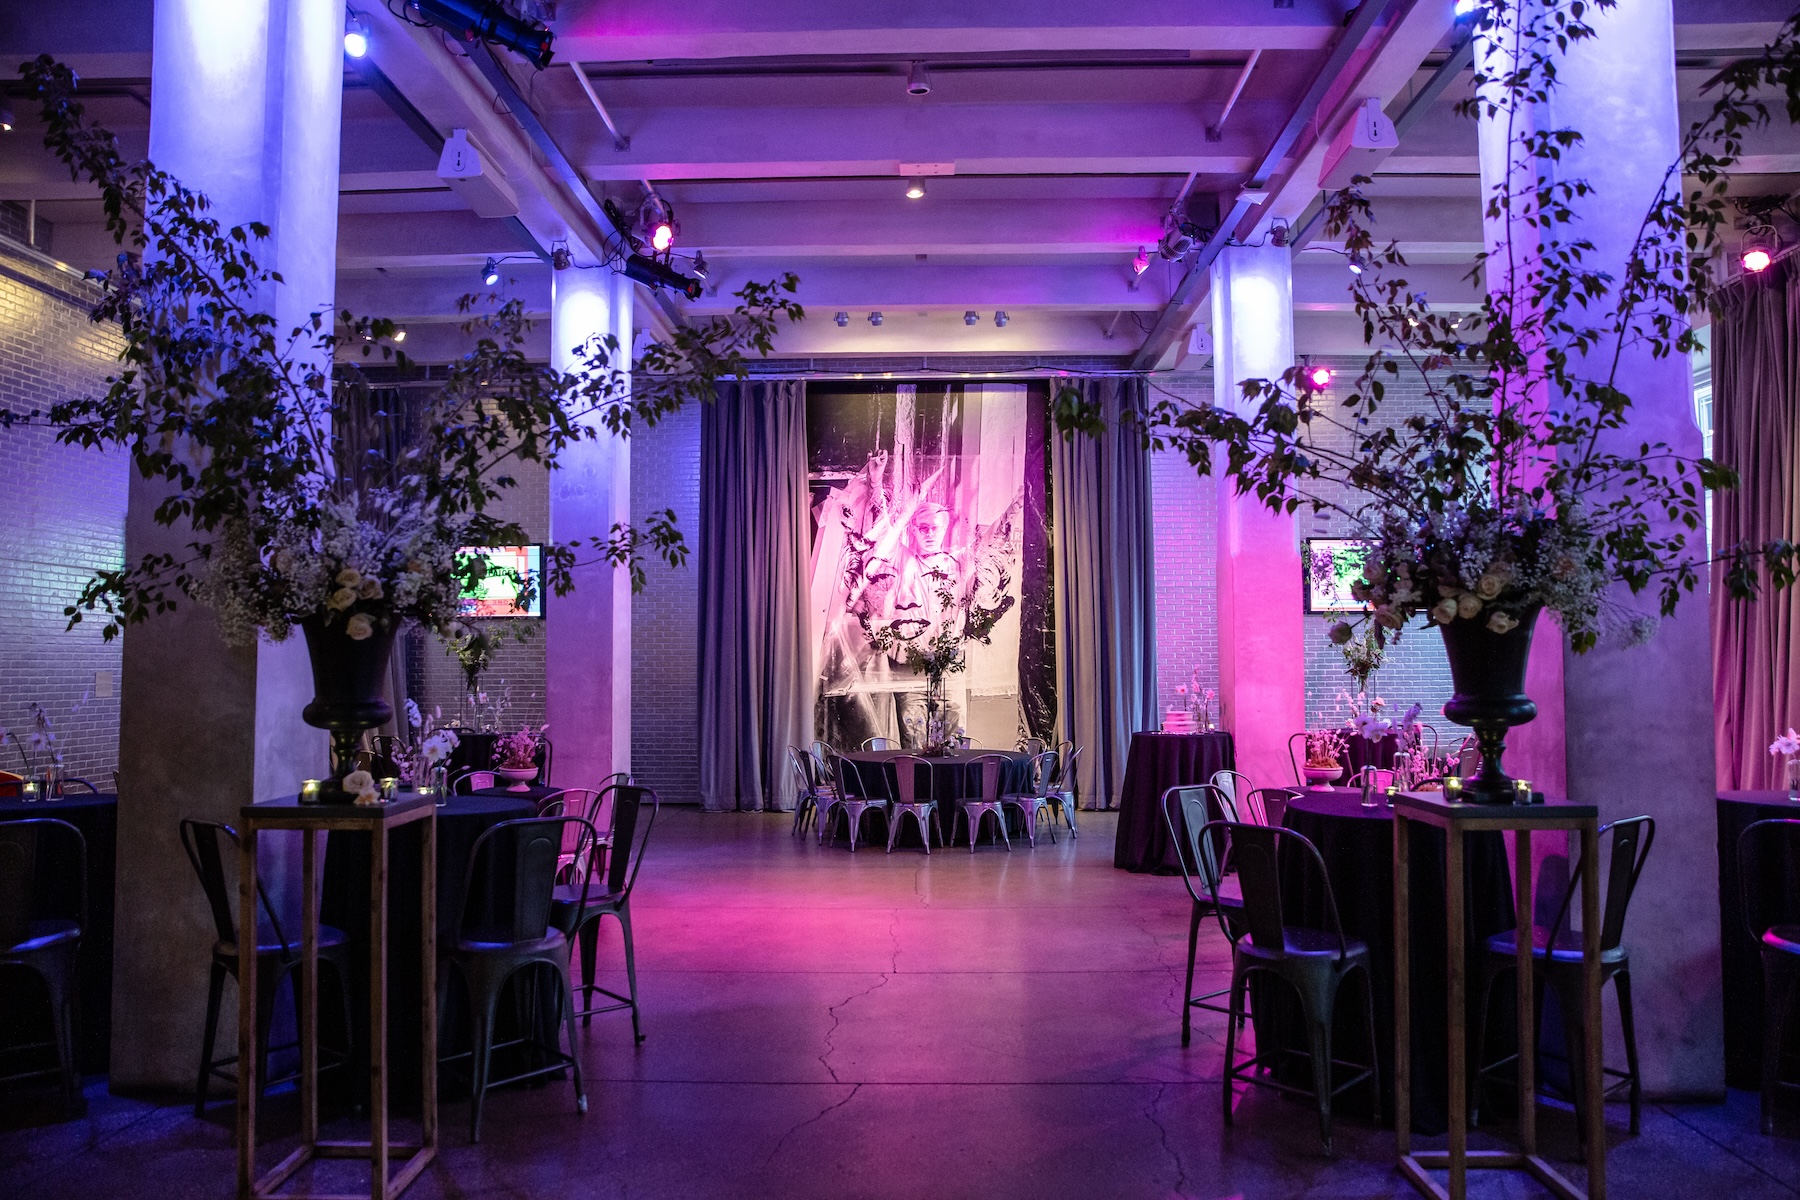 The Andy Warhol Museum's entrance space decorated with tables and floral arrangements accented with magenta overhead lights.